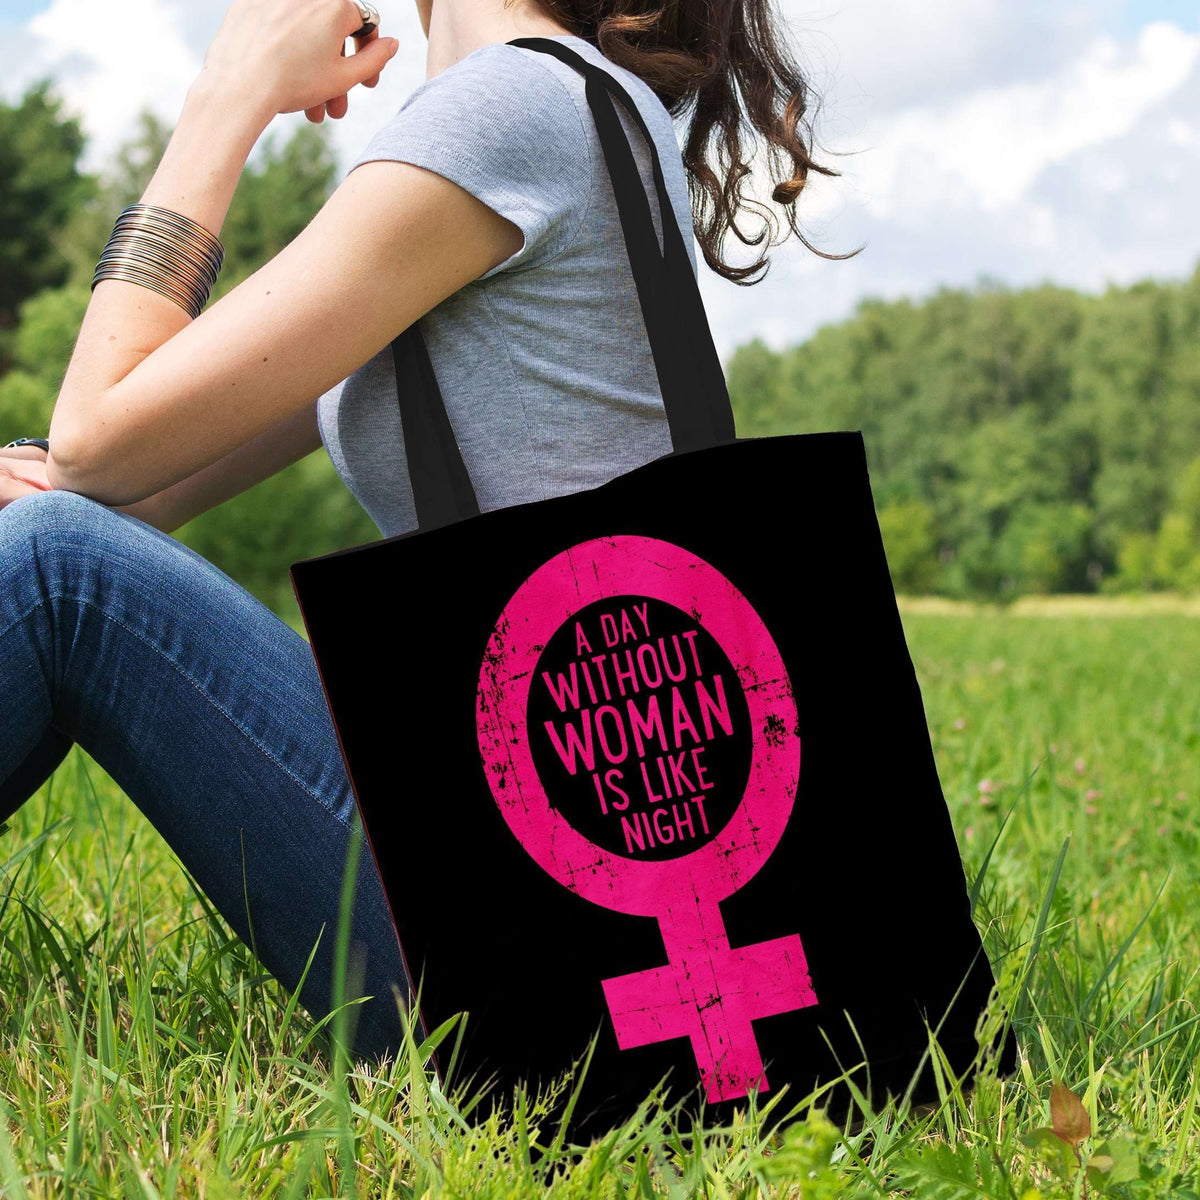 Designs by MyUtopia Shout Out:A Day Without Woman Fabric Totebag Reusable Shopping Tote